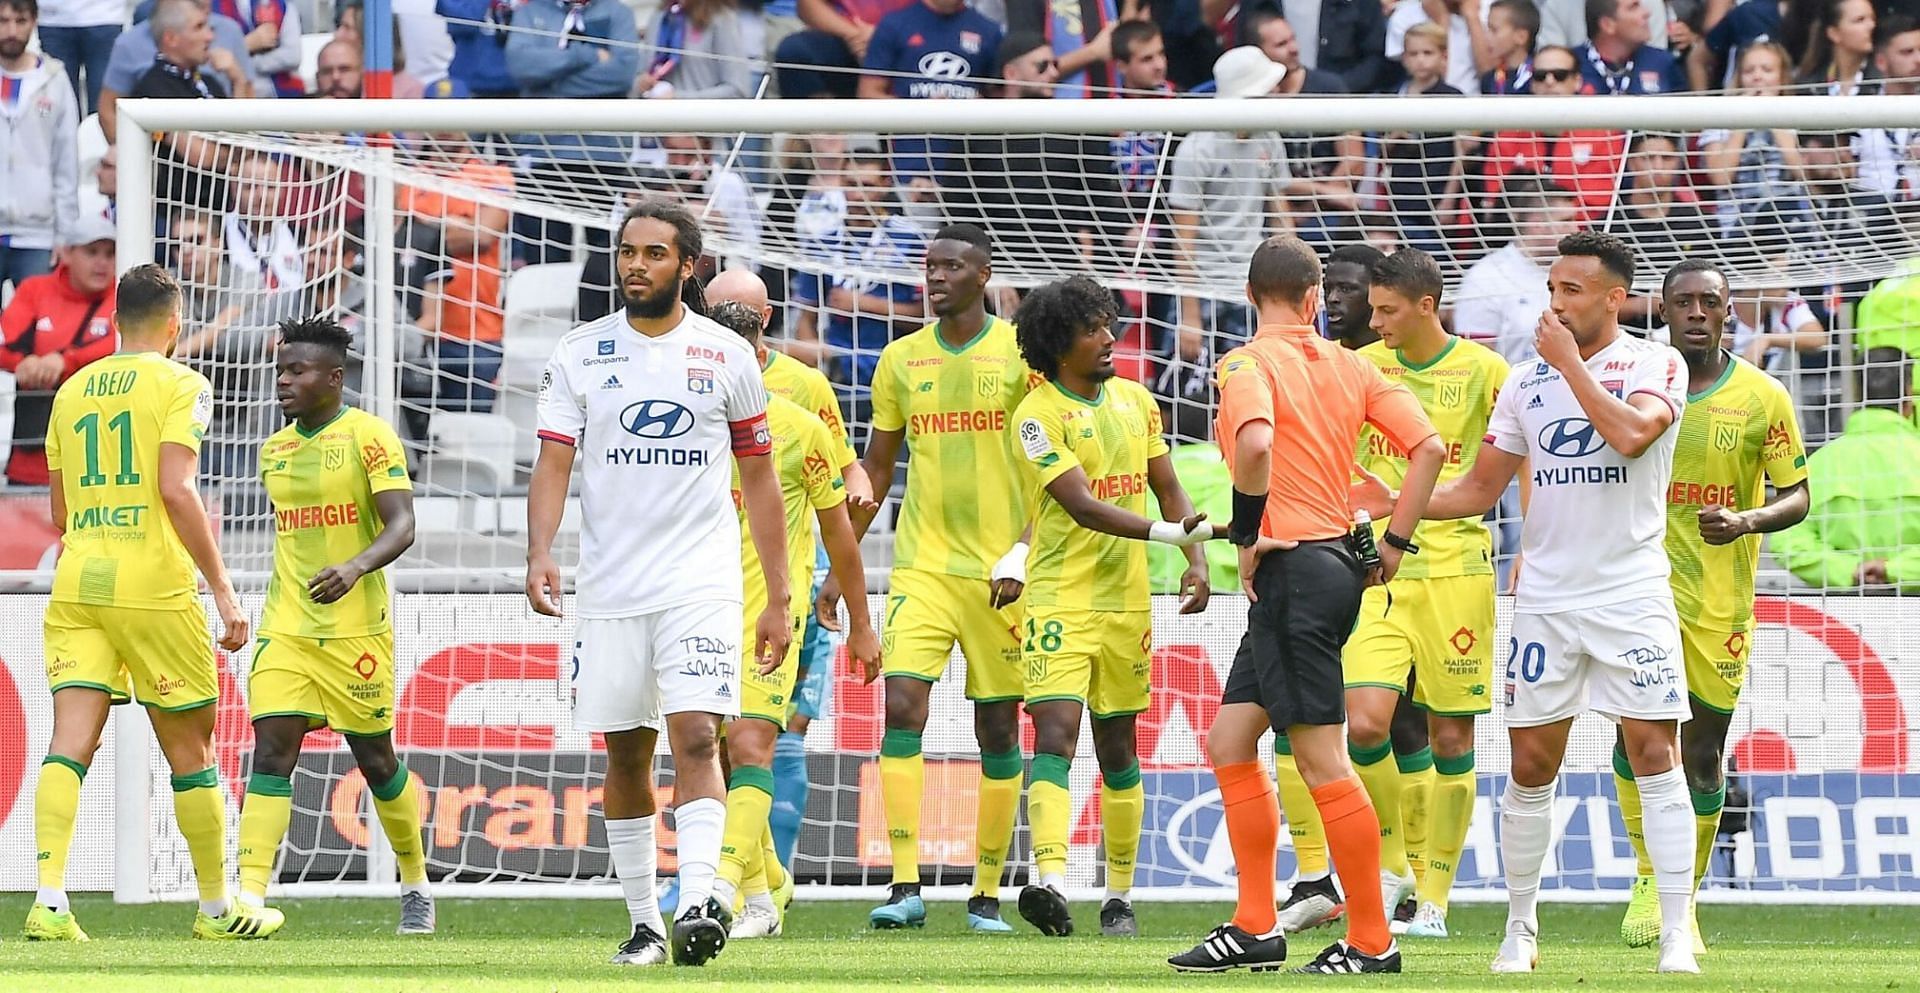 Lyon and Nantes go head-to-head in Ligue 1 on Friday